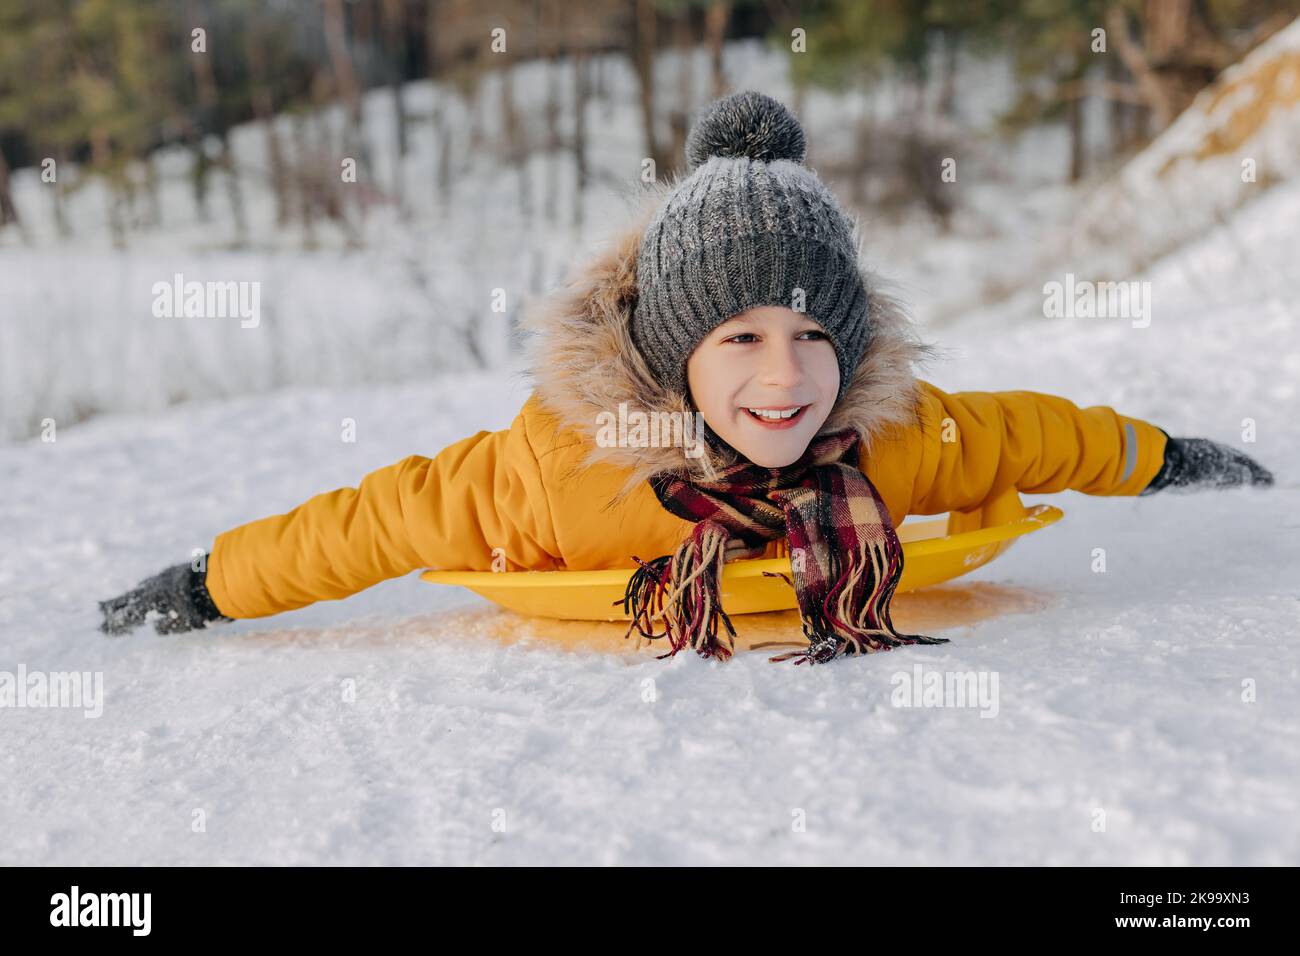 Happy kid ride laying on a plastic sled on the background of snowy forest. Boy having fun on christmas holiday. Concept of winter sports, active leisu Stock Photo